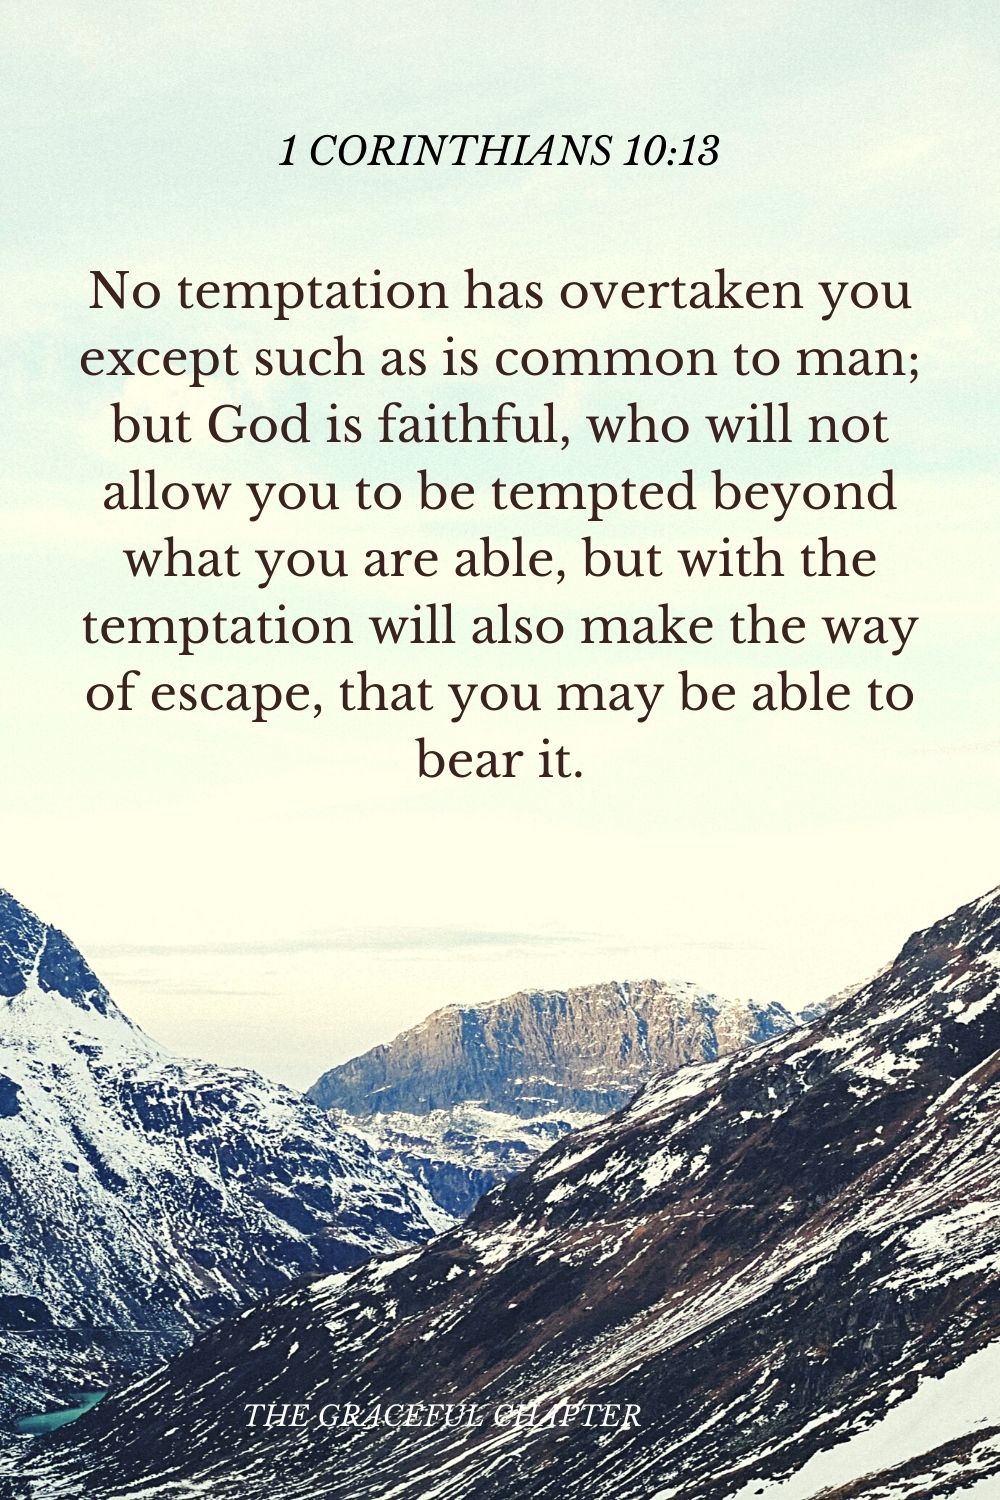 No temptation has overtaken you except such as is common to man; but God is faithful, who will not allow you to be tempted beyond what you are able, but with the temptation will also make the way of escape, that you may be able to bear it. 1 Corinthians 10:13